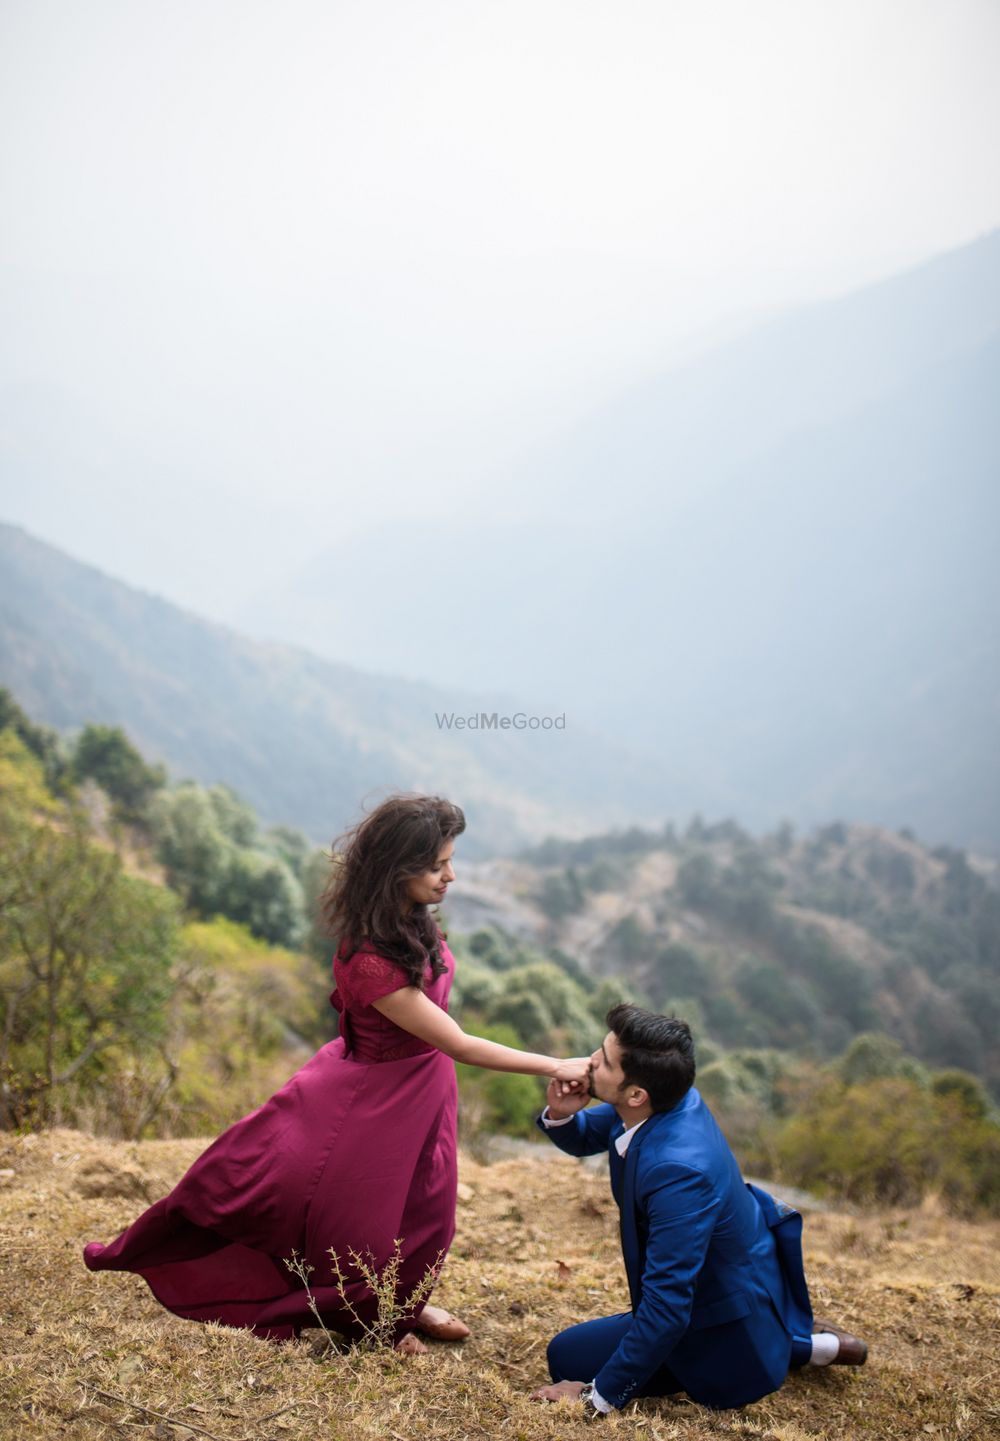 Photo From Pre Wed_Neeraj and Pooja - By Akhilesh Singh Photography